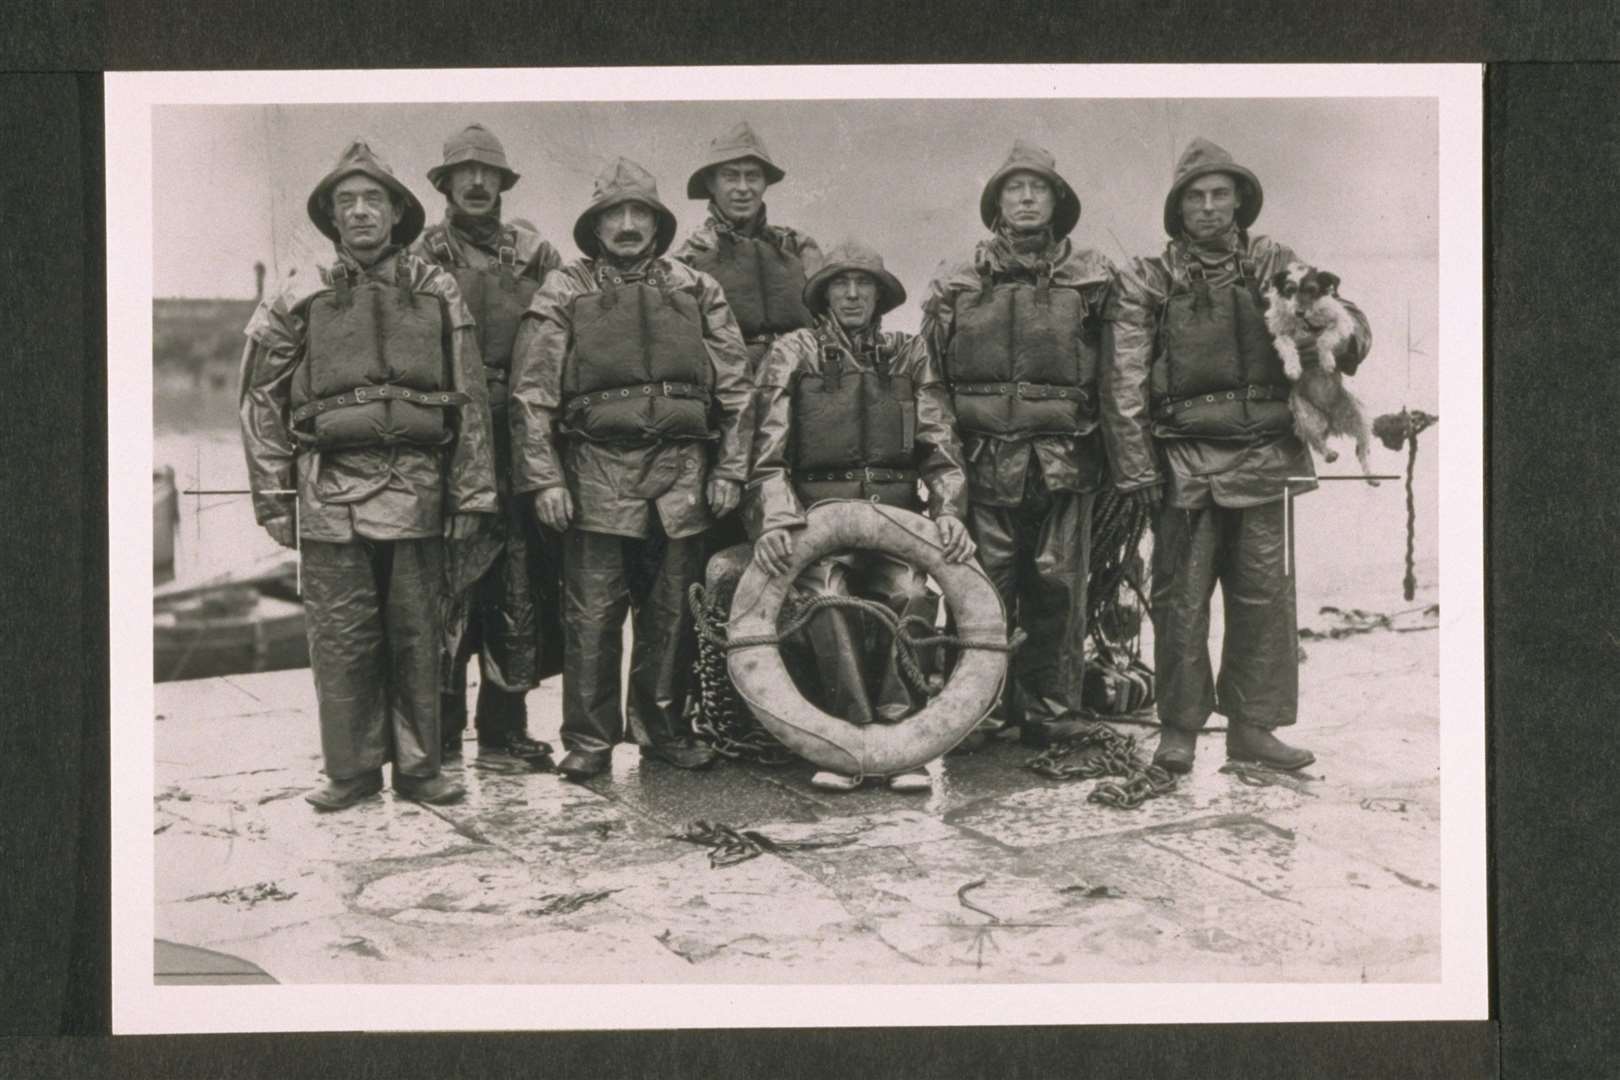 The exhibition includes photos and items from the RNLI’s lifeboat crews and lifeguards who have saved over 144,000 lives since 1824. Picture: Supplied by Vikki Rimmer